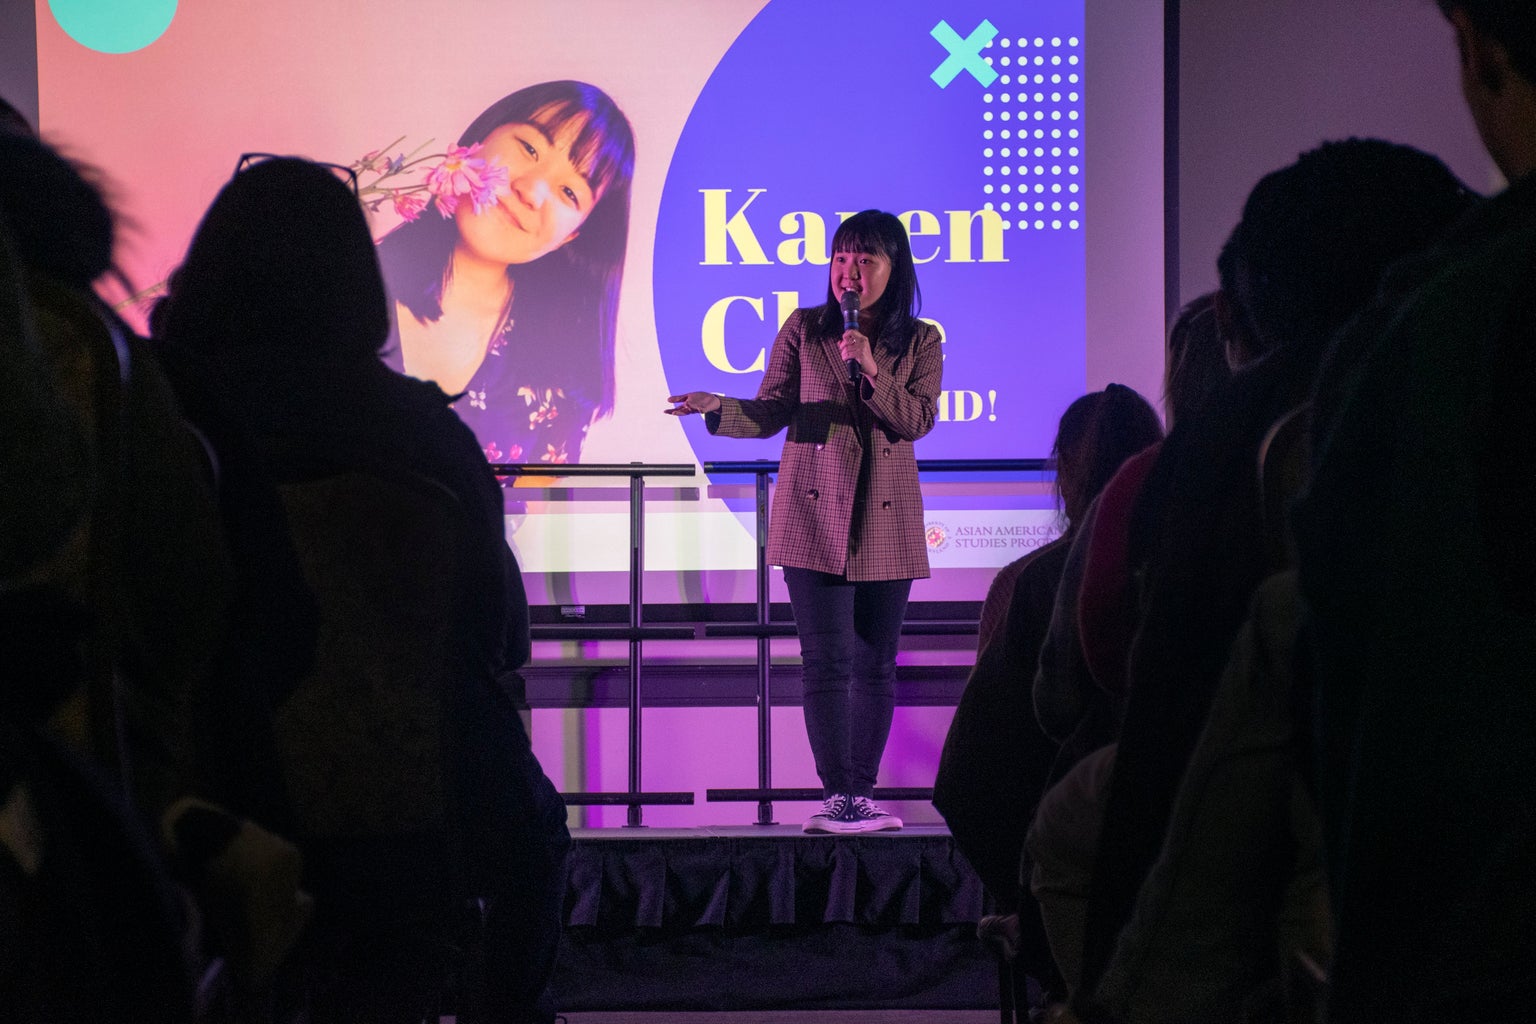 karen chee performing stand-up